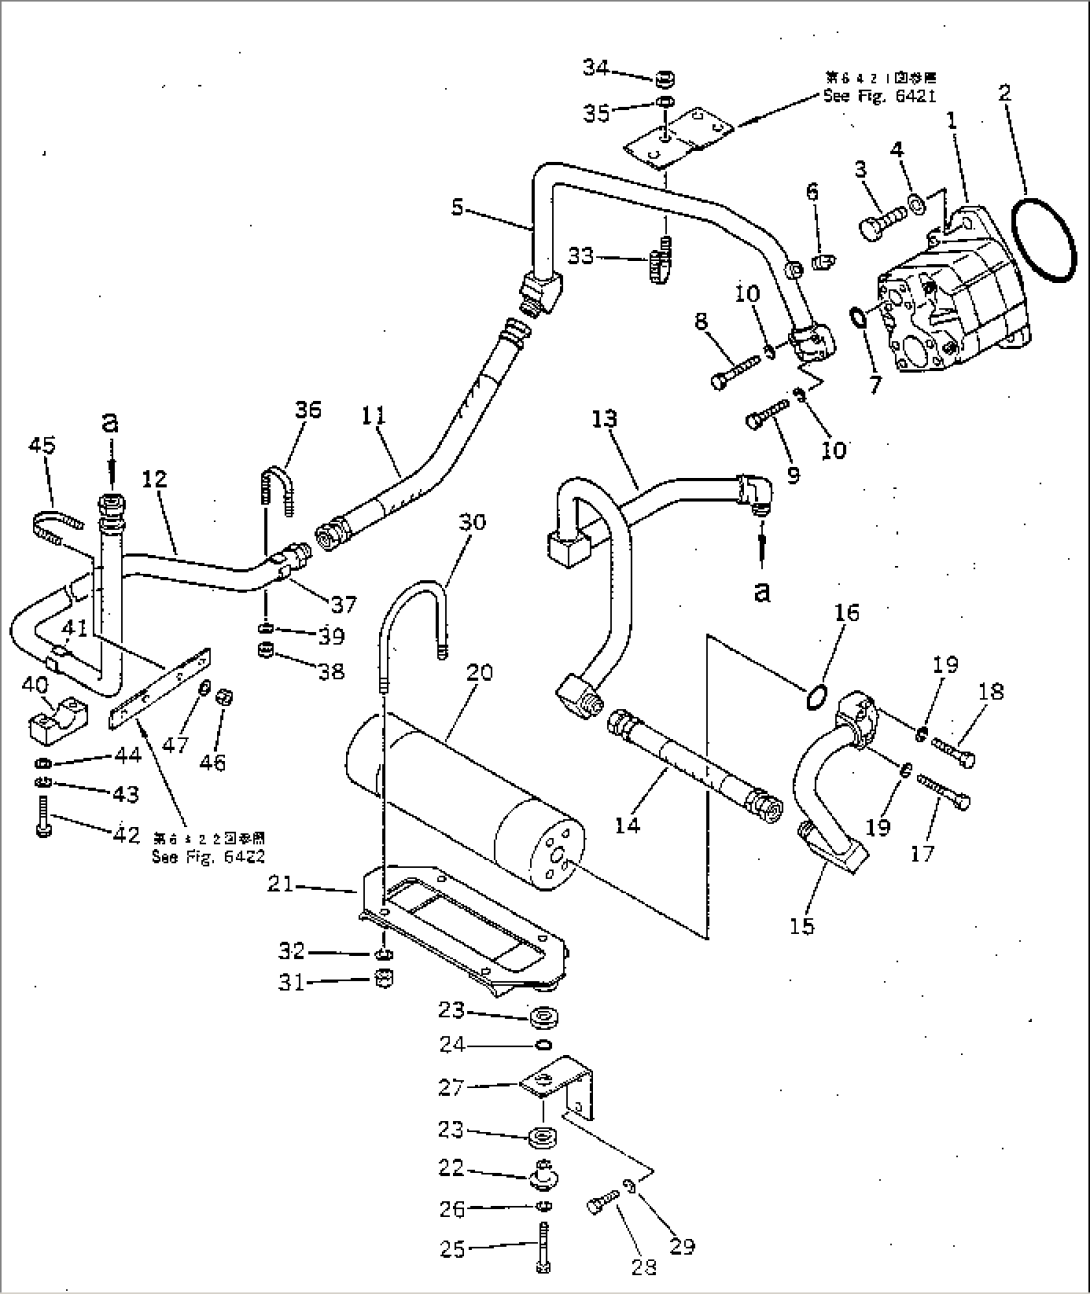 HYDRAULIC PIPING (WINCH PUMP TO SWIVEL JOINT) (1/3)